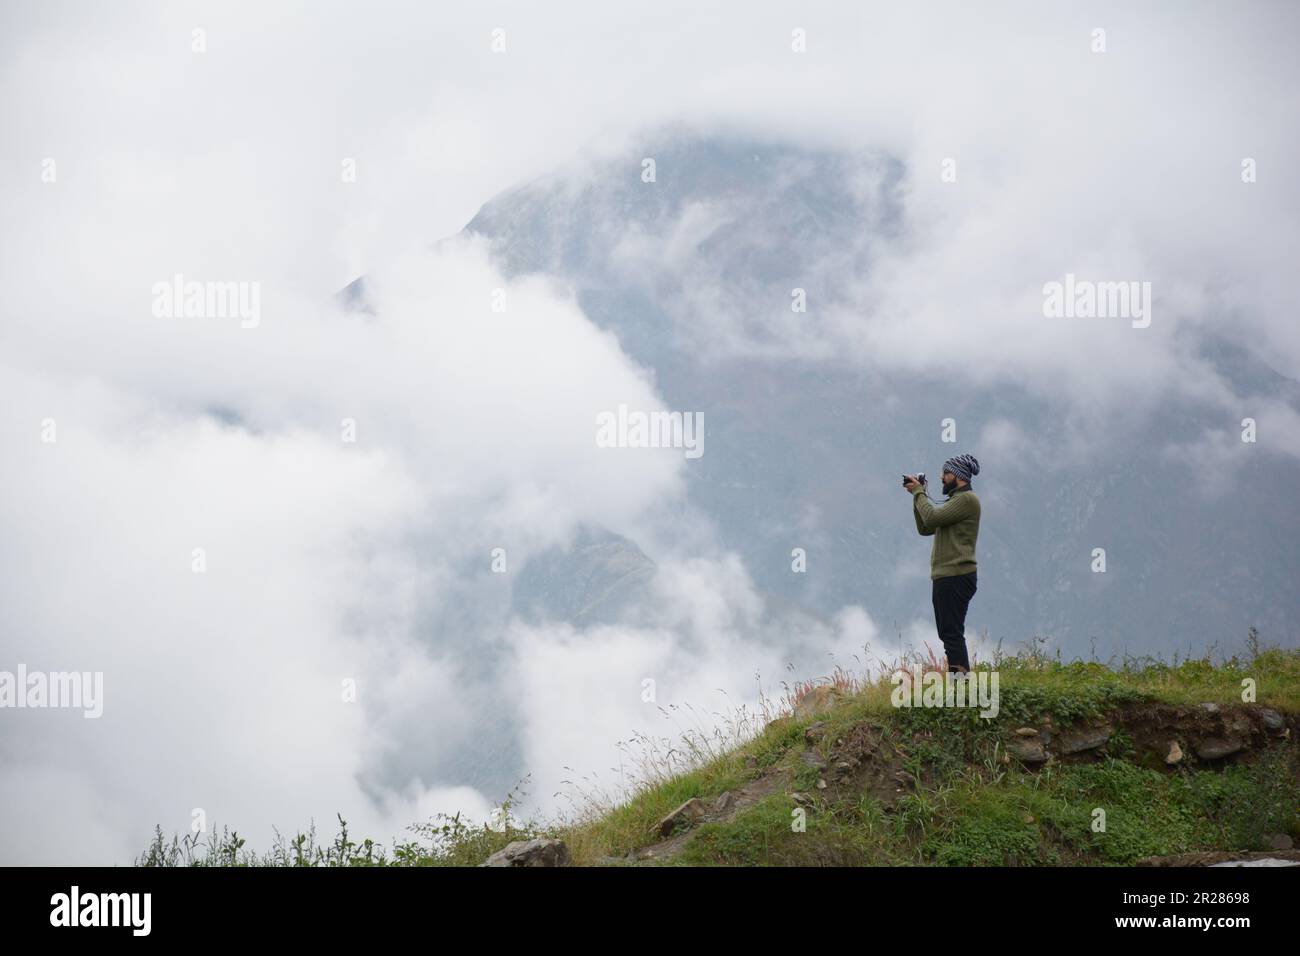 In pursuit of the perfect shot: A photographer captures the breath taking view from atop a mountain. Stock Photo